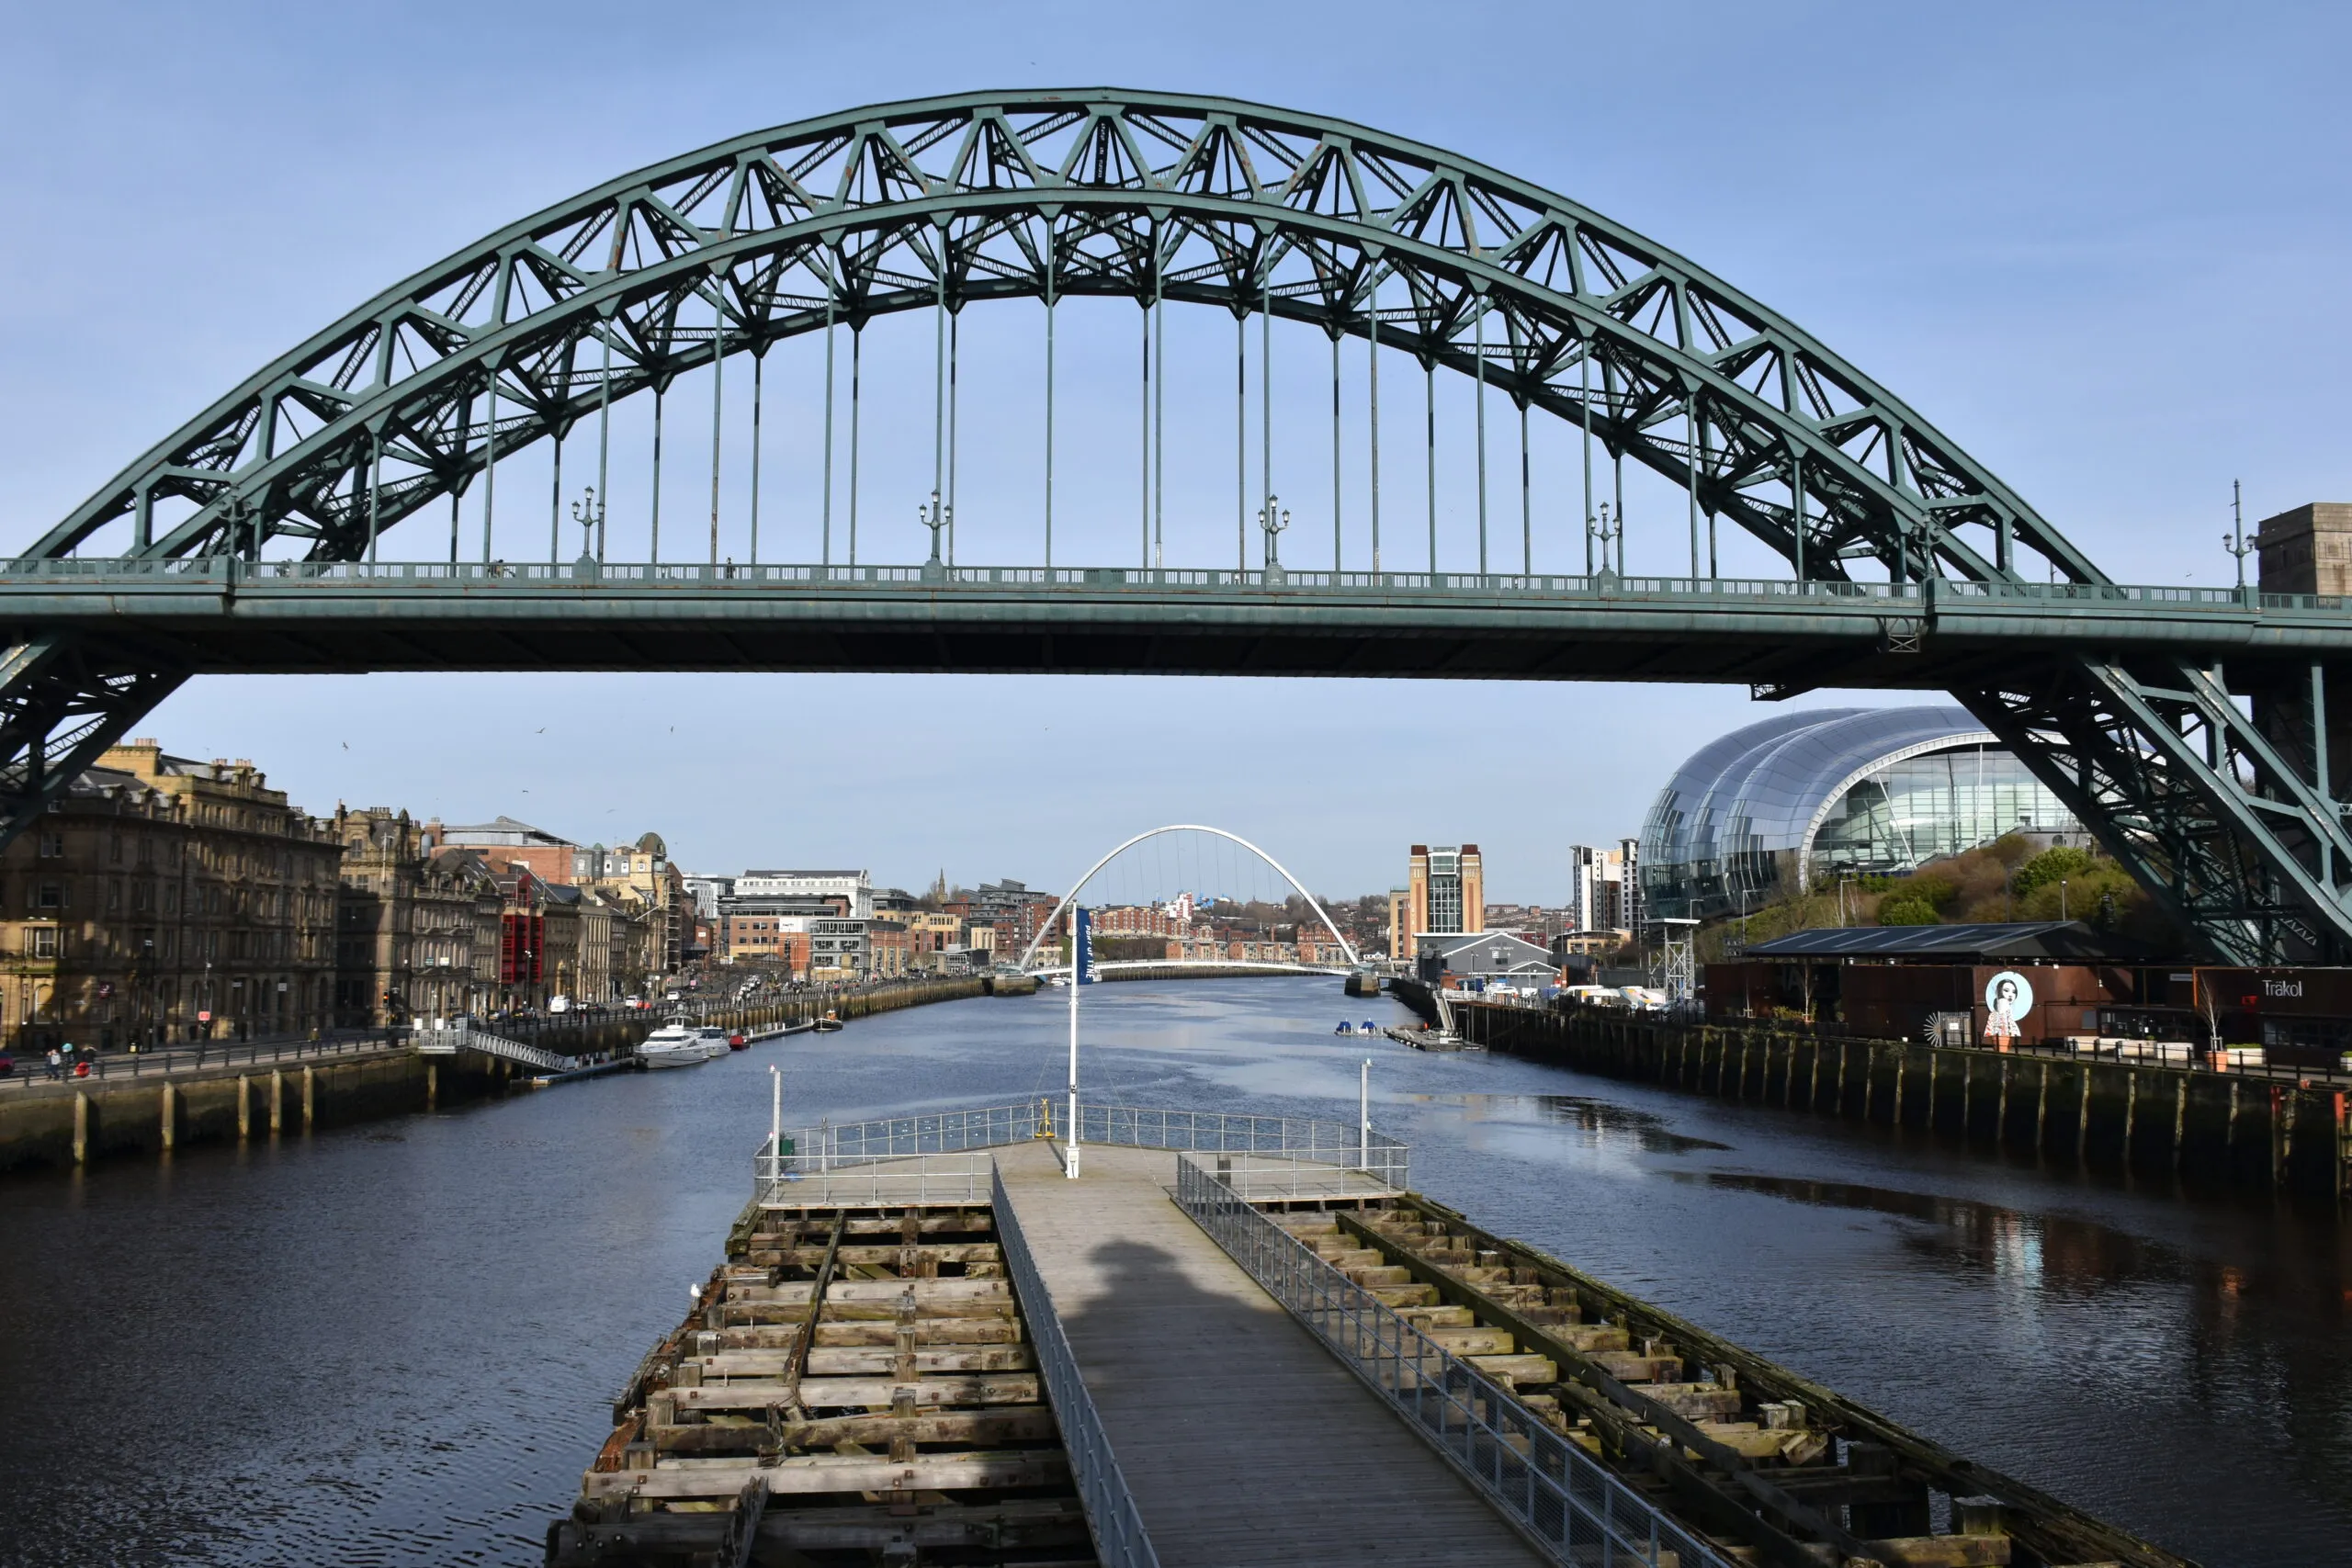 Have you visited Newcastle’s story? From 8th October – 2nd December, Discovery Museum